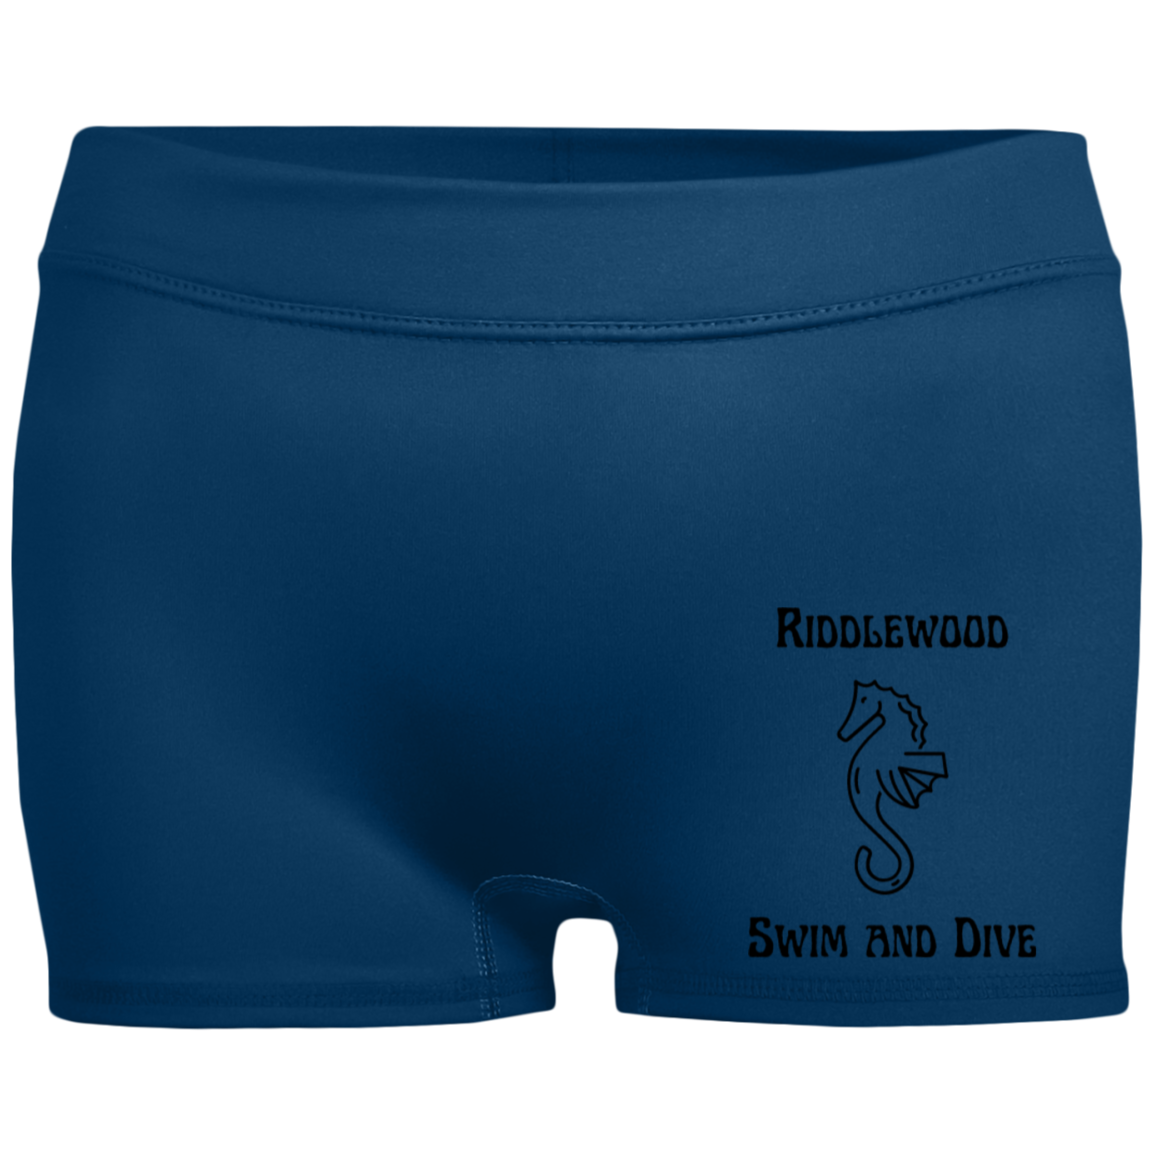 Riddlewood swim and dive TeamStore Ladies' Fitted Moisture-Wicking 2.5 inch Inseam Shorts